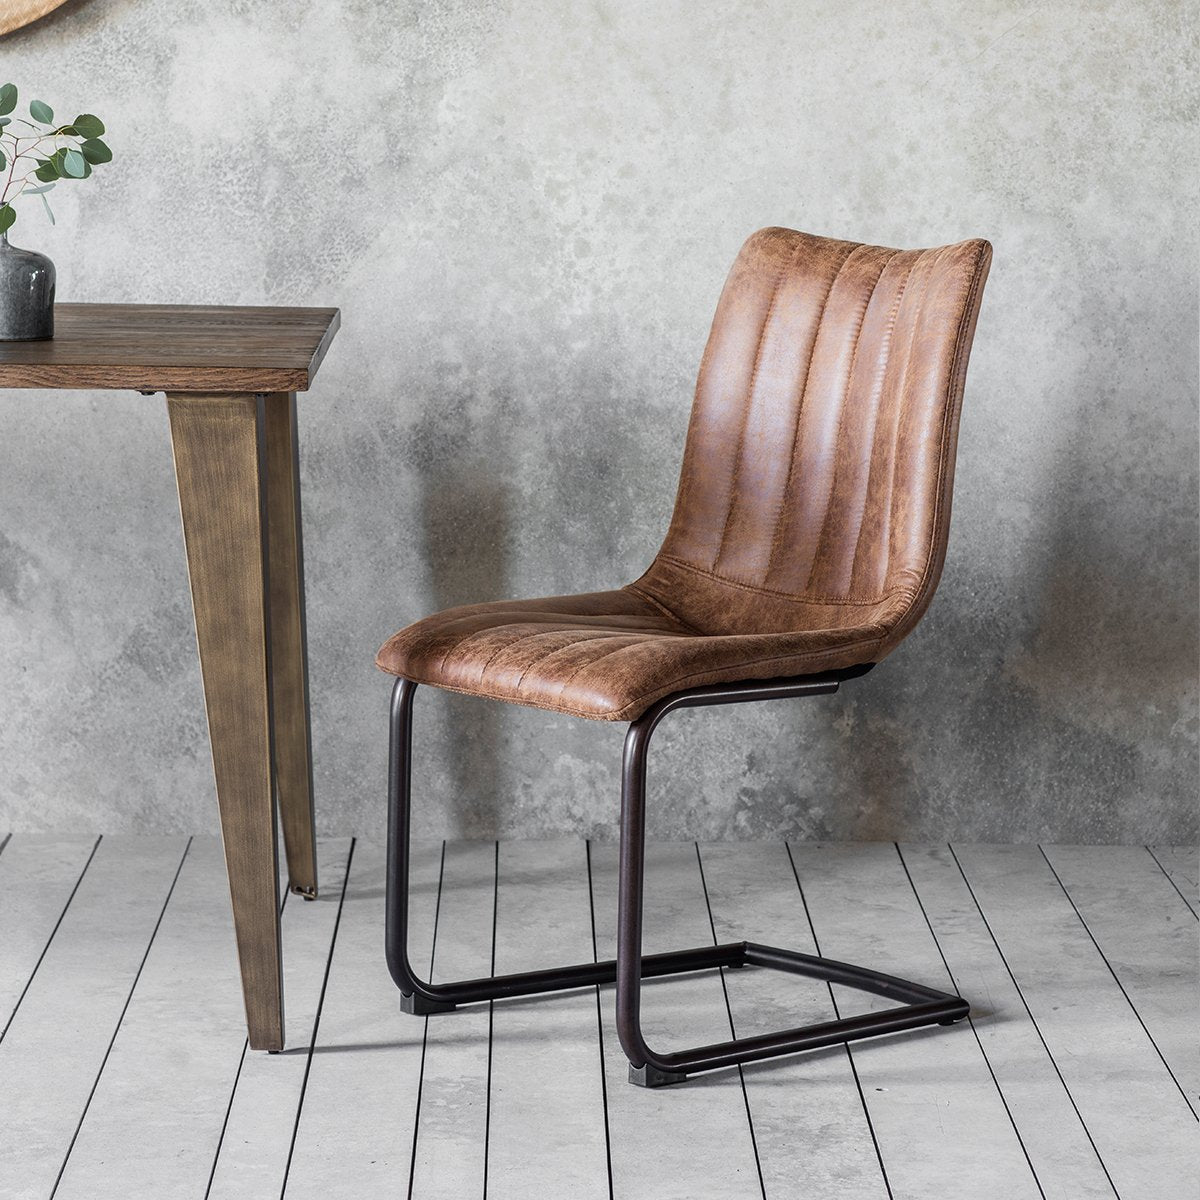 Gallery Direct Set Of 2 Edington Faux Leather Brown Dining Chairs Outlet